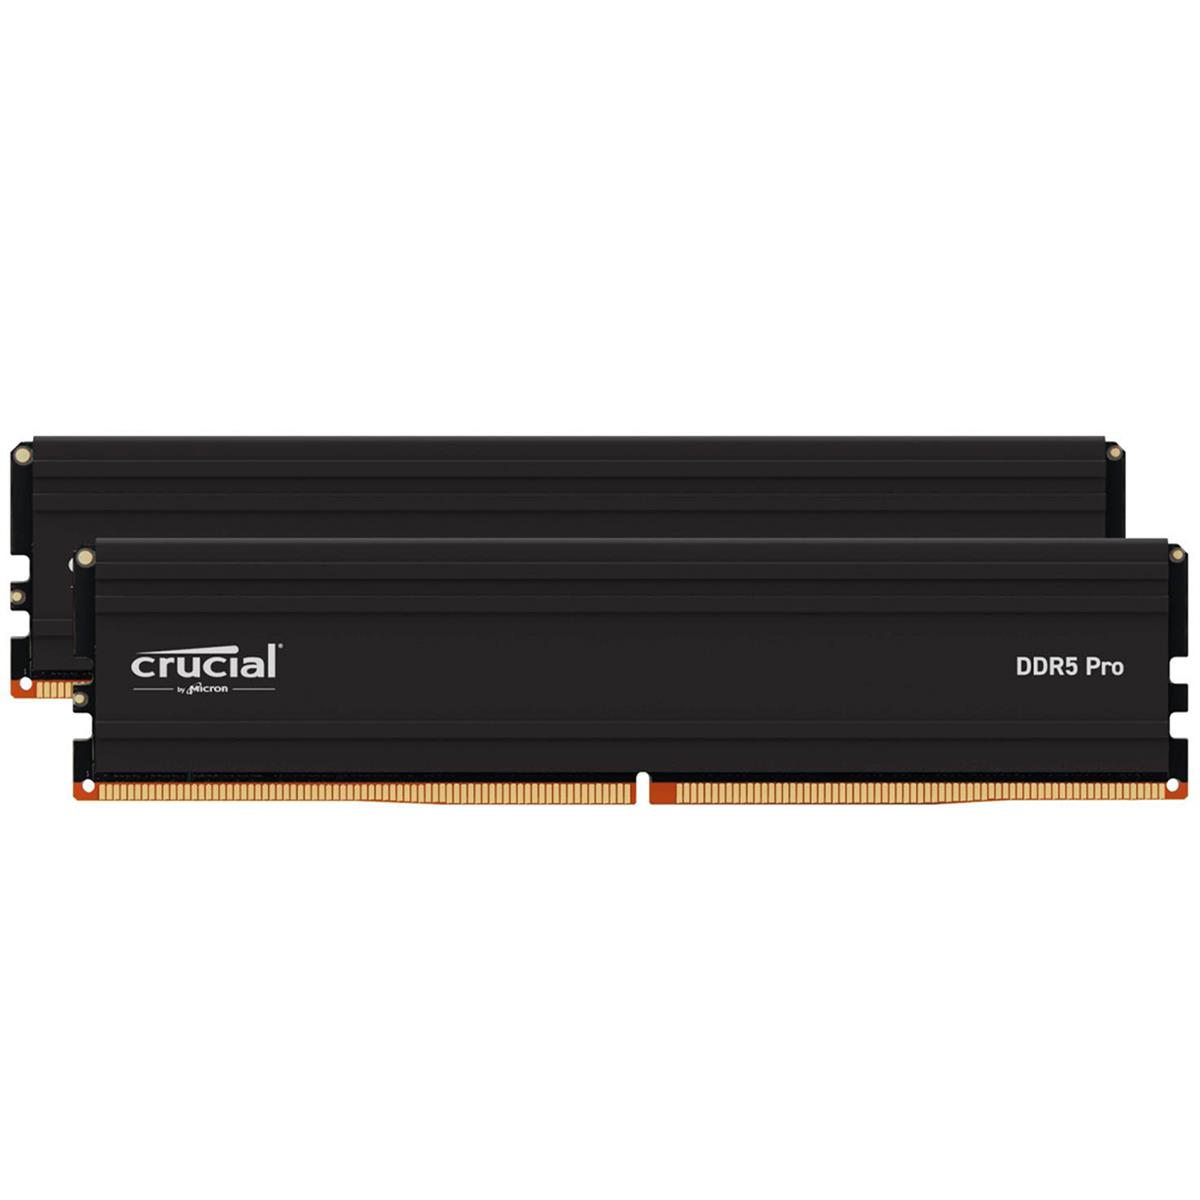 Image of Crucial Pro DDR5 5600MHz CL46 UDIMM Desktop Memory Module 48GB (2x24GB)